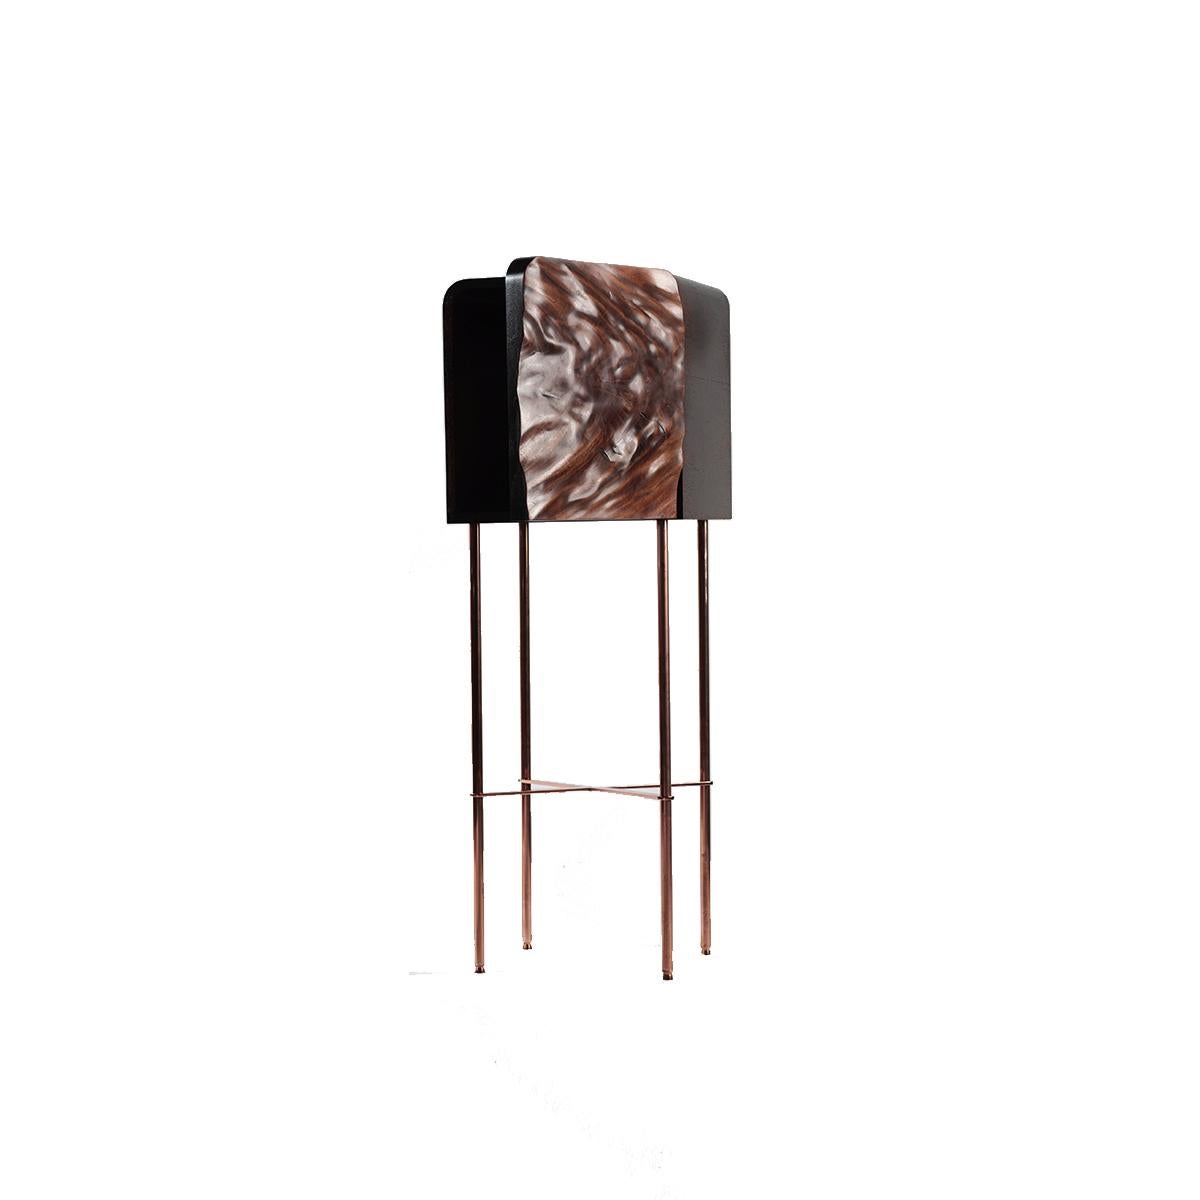 African mahogany wood veneer cabinet style nightstand, they also fit well as side tables or high cabinet pieces. Legs in copper plated steel. Handcrafted. Priced per single piece. This listing is for the shorter night stand / sidecabinet model; 